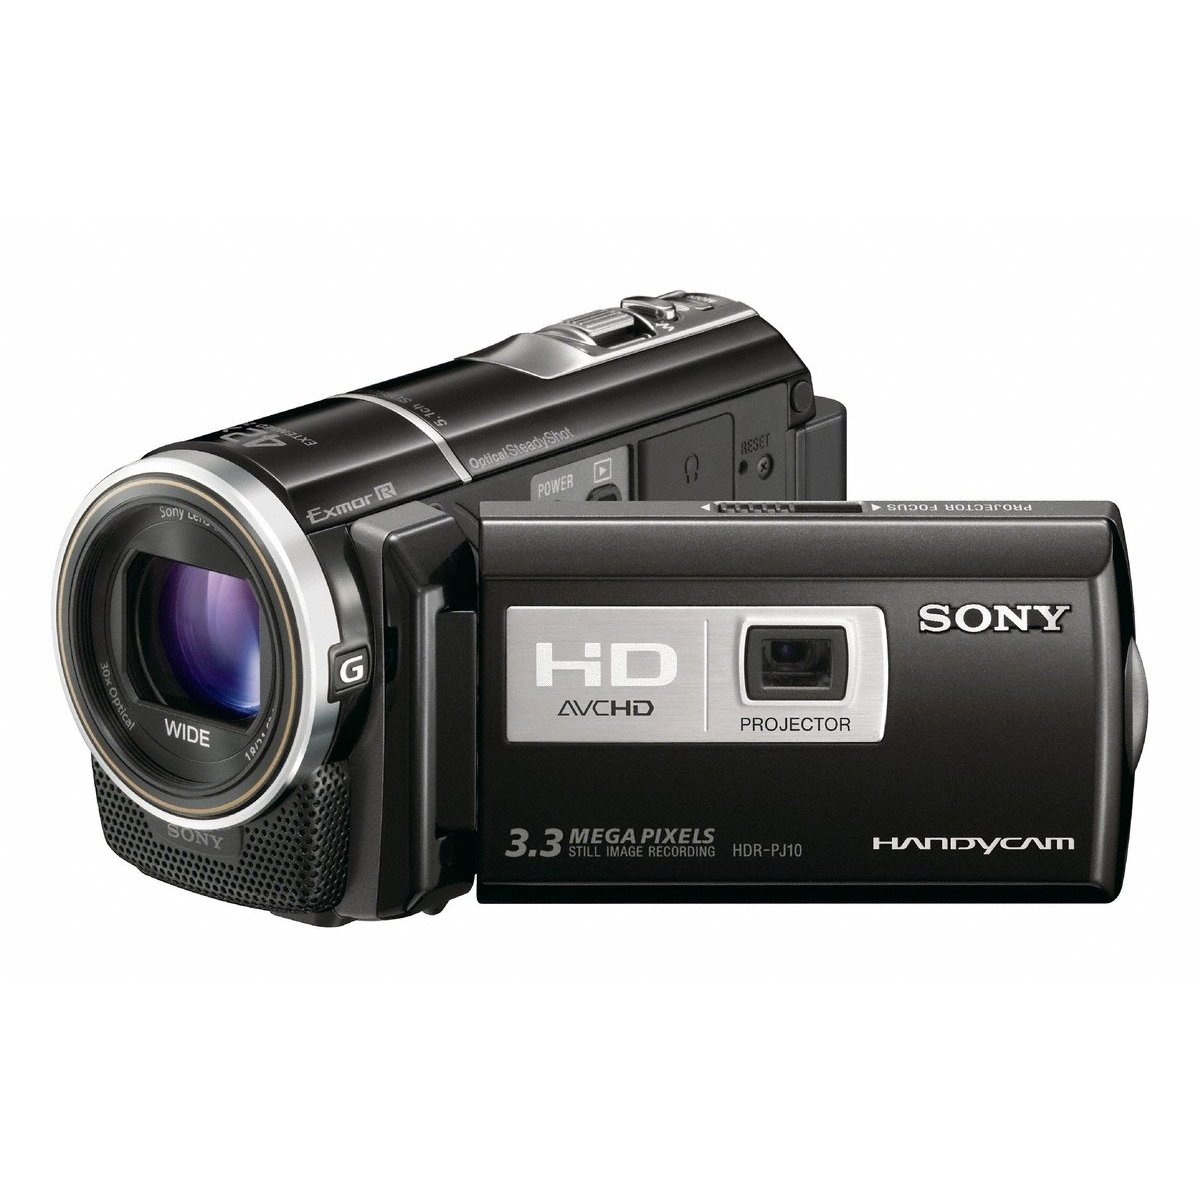 http://thetechjournal.com/wp-content/uploads/images/1110/1317694084-sony-hdrpj10-high-definition-handycam-camcorder-with-projector-1.jpg